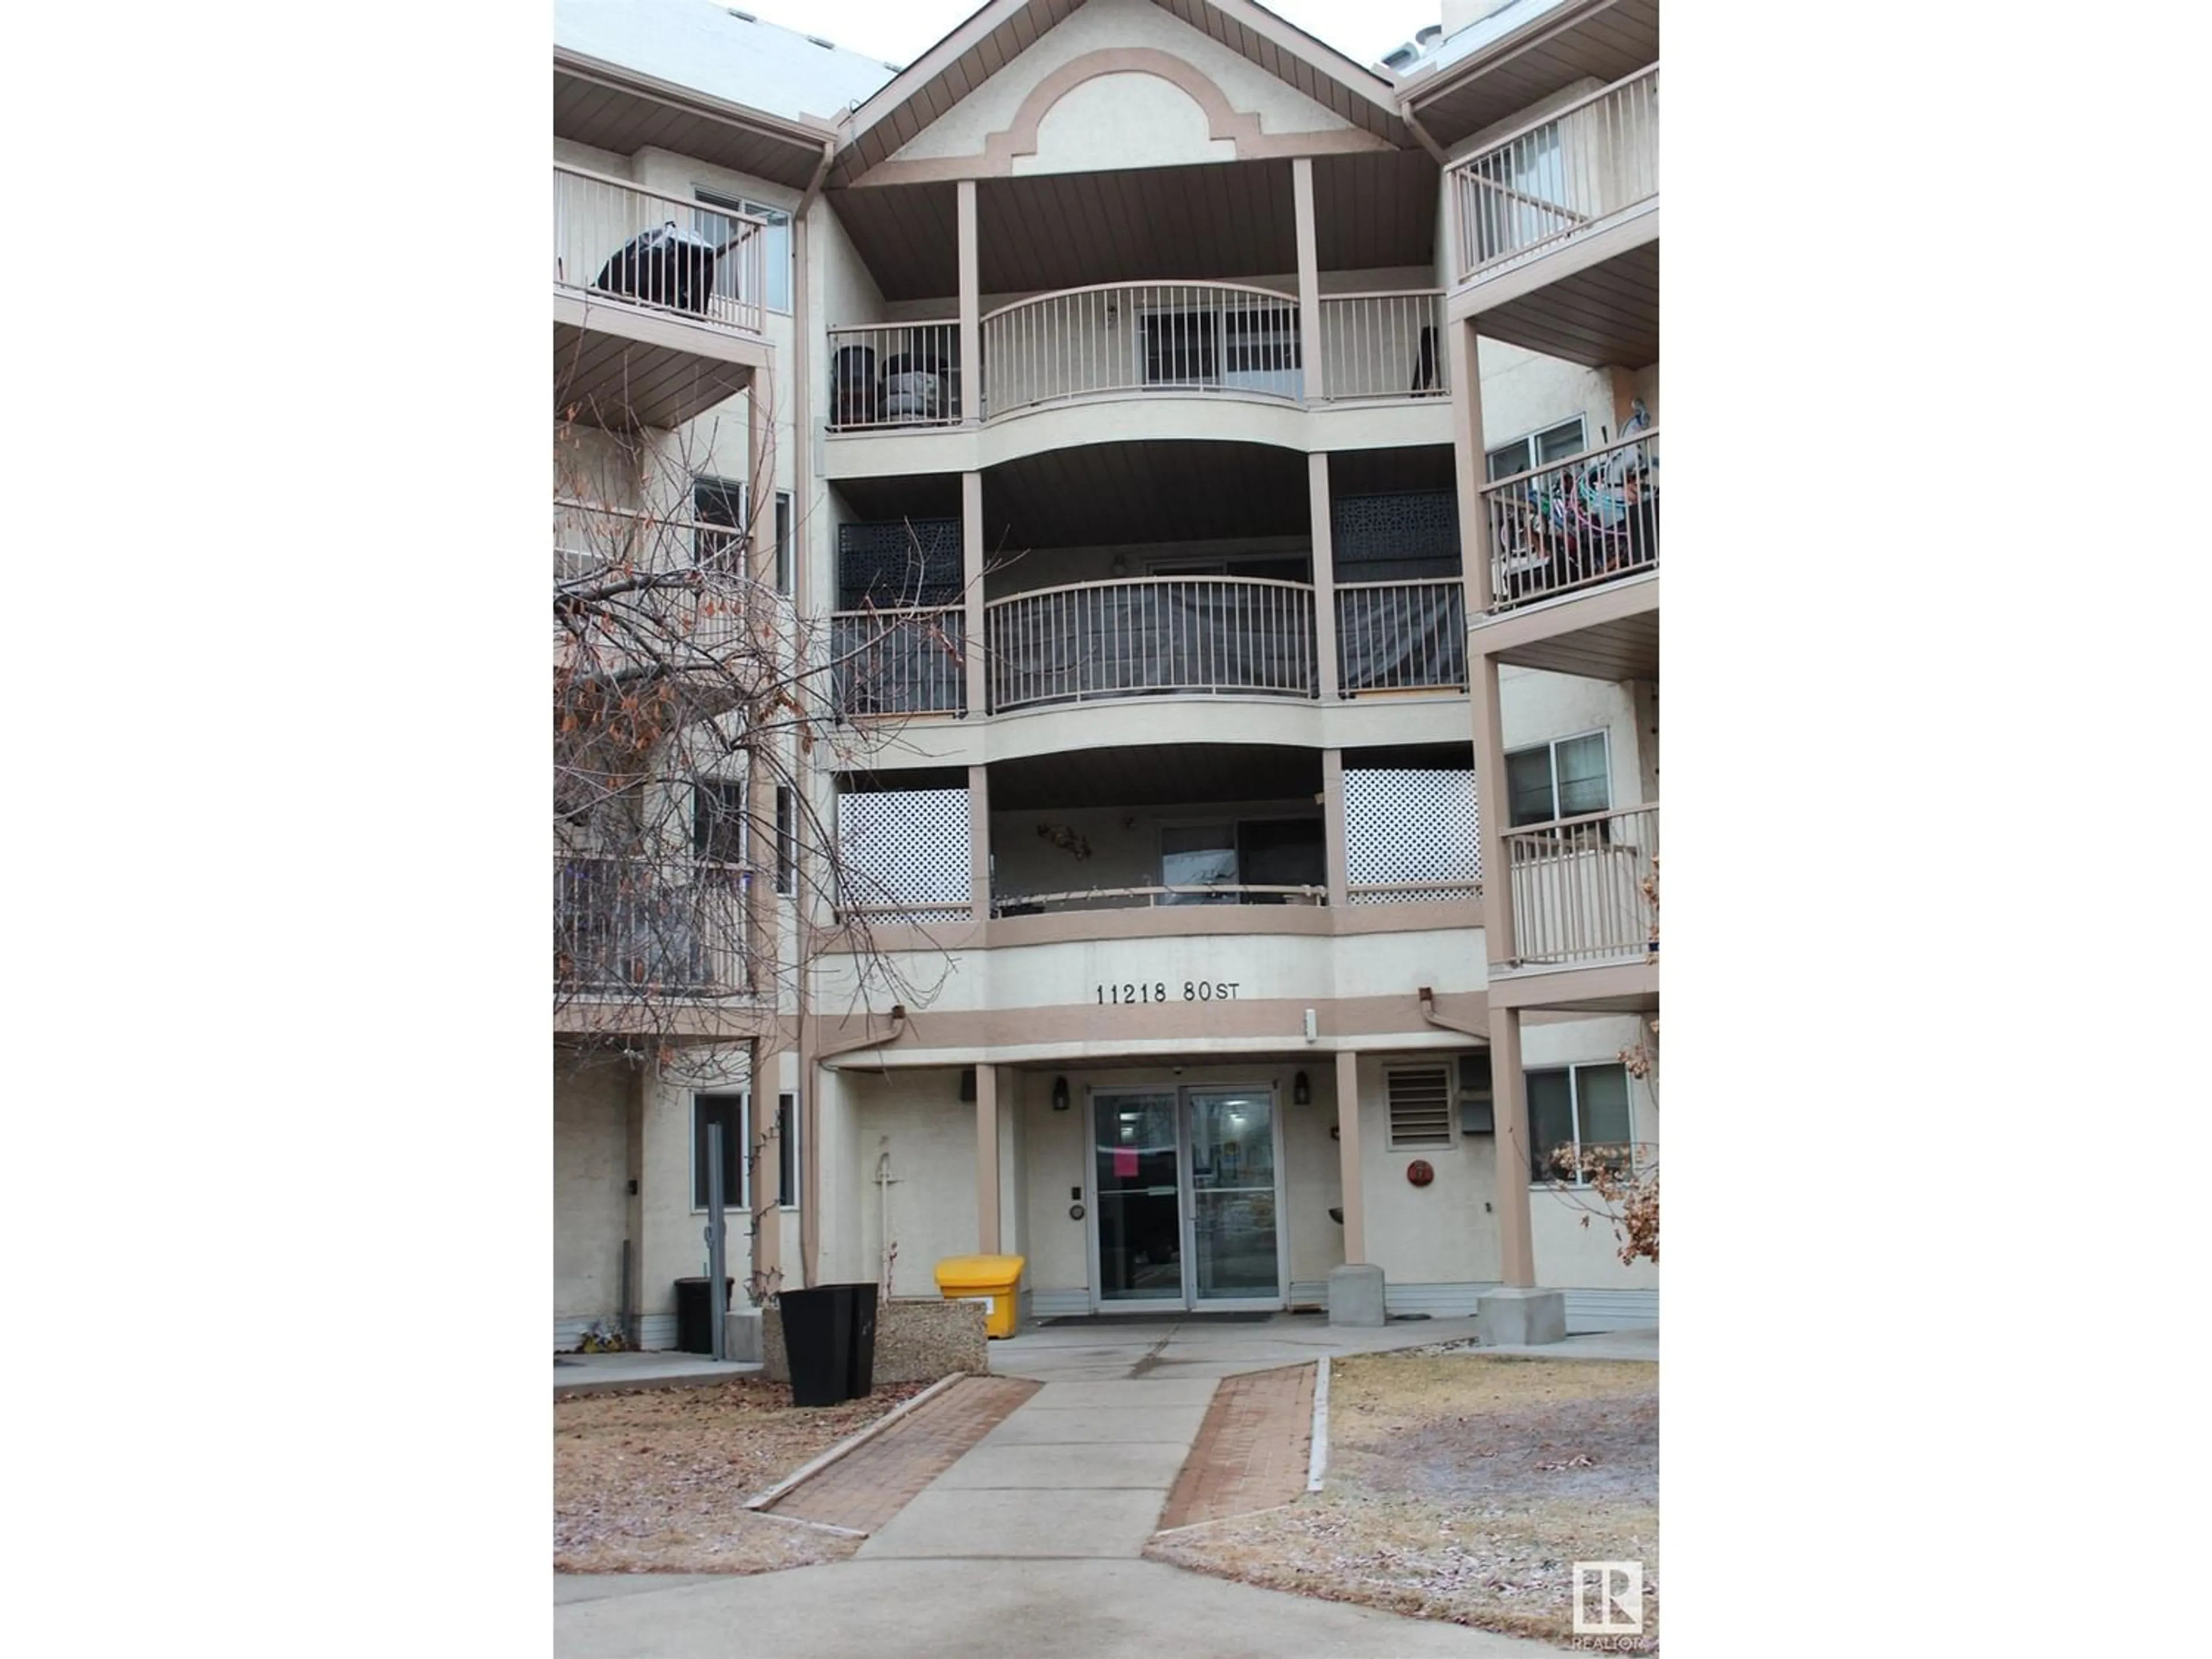 A pic from exterior of the house or condo for #209 11218 80 ST NW, Edmonton Alberta T5B4V9